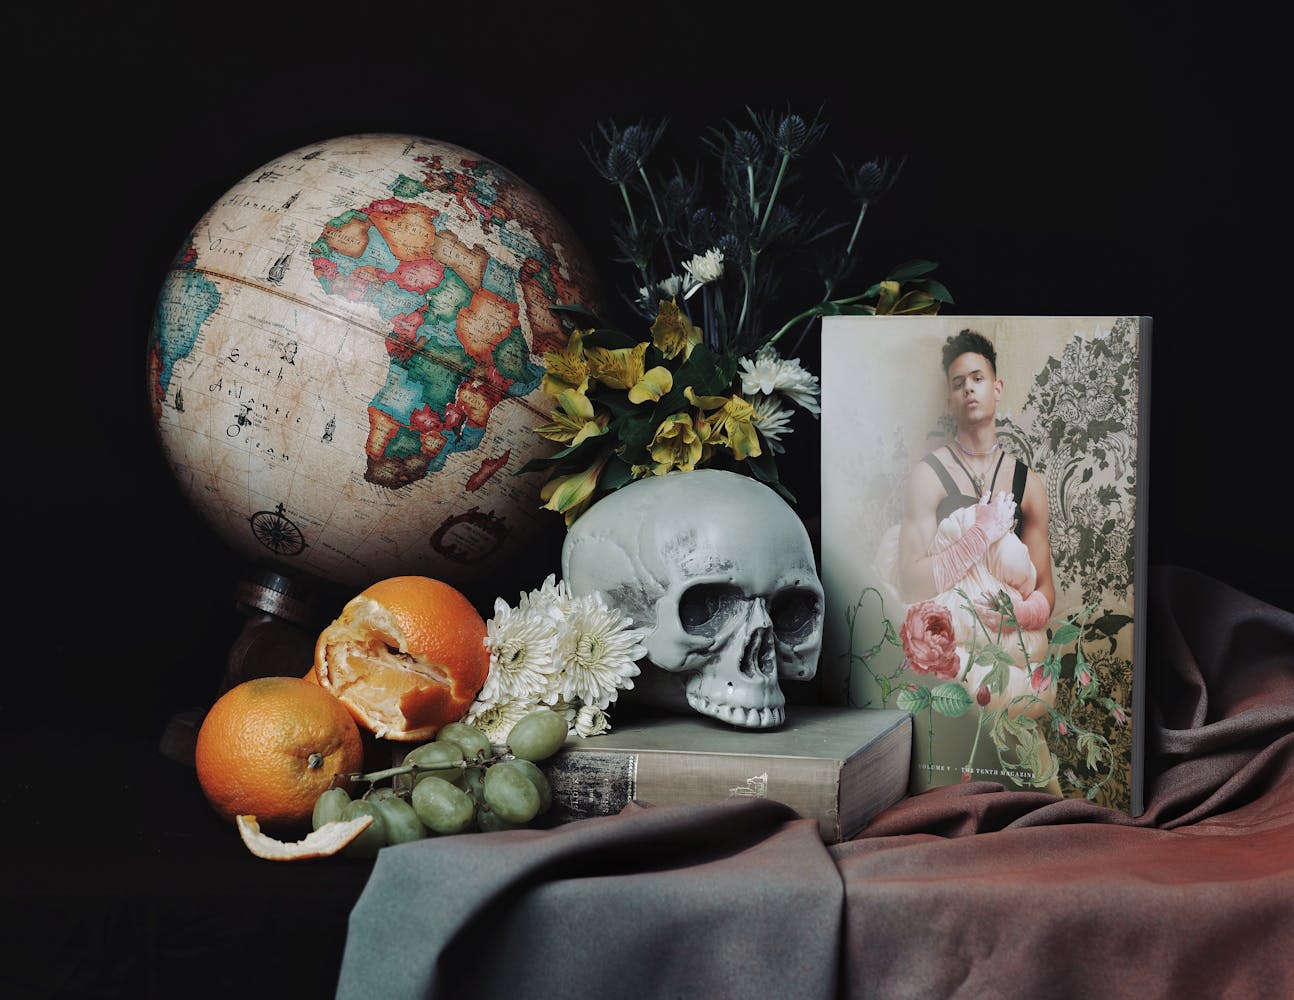 Painting-like still life photograph including skull, globe, oranges, flowers, and magazine cover